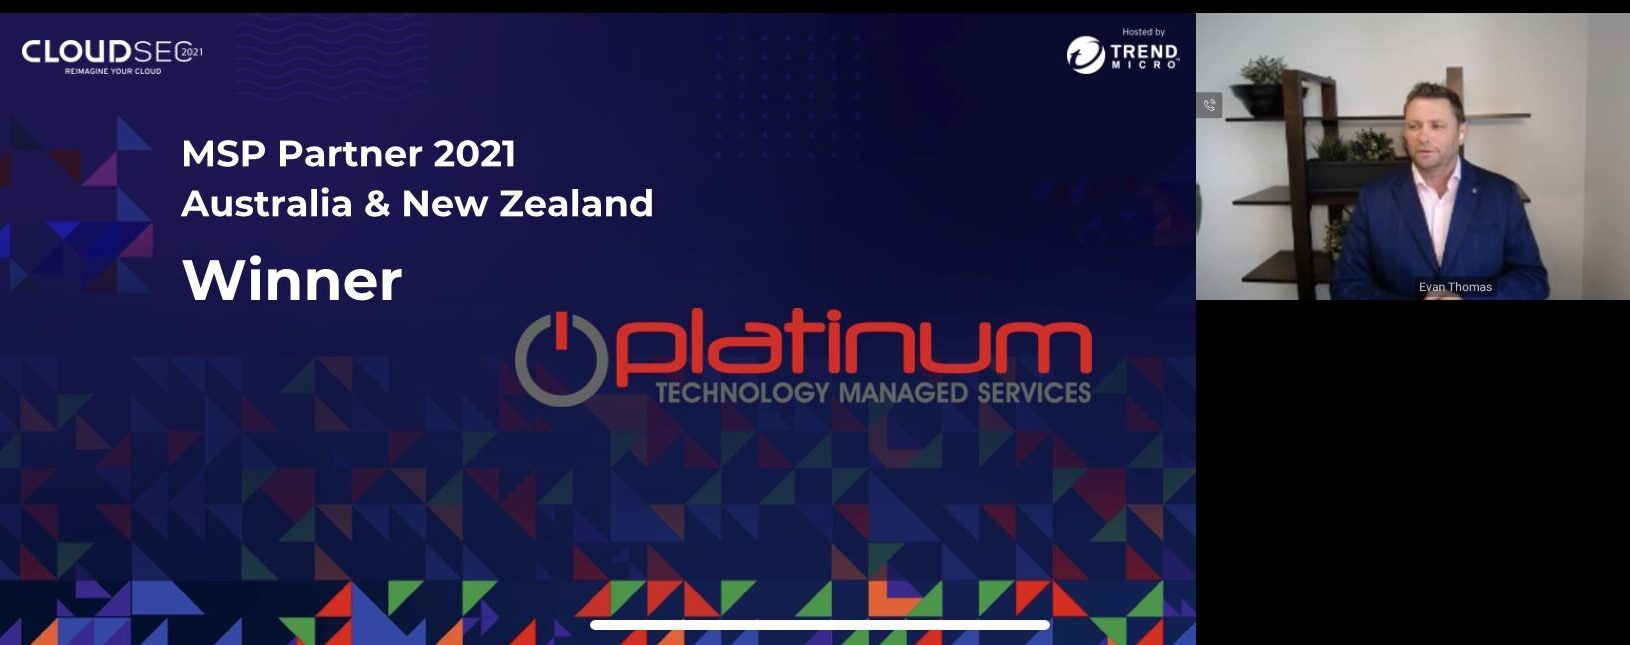 Image of the MSP Partner of the Year 2021 announcement = Platinum Technology - Cloud Sec - Trend Micro